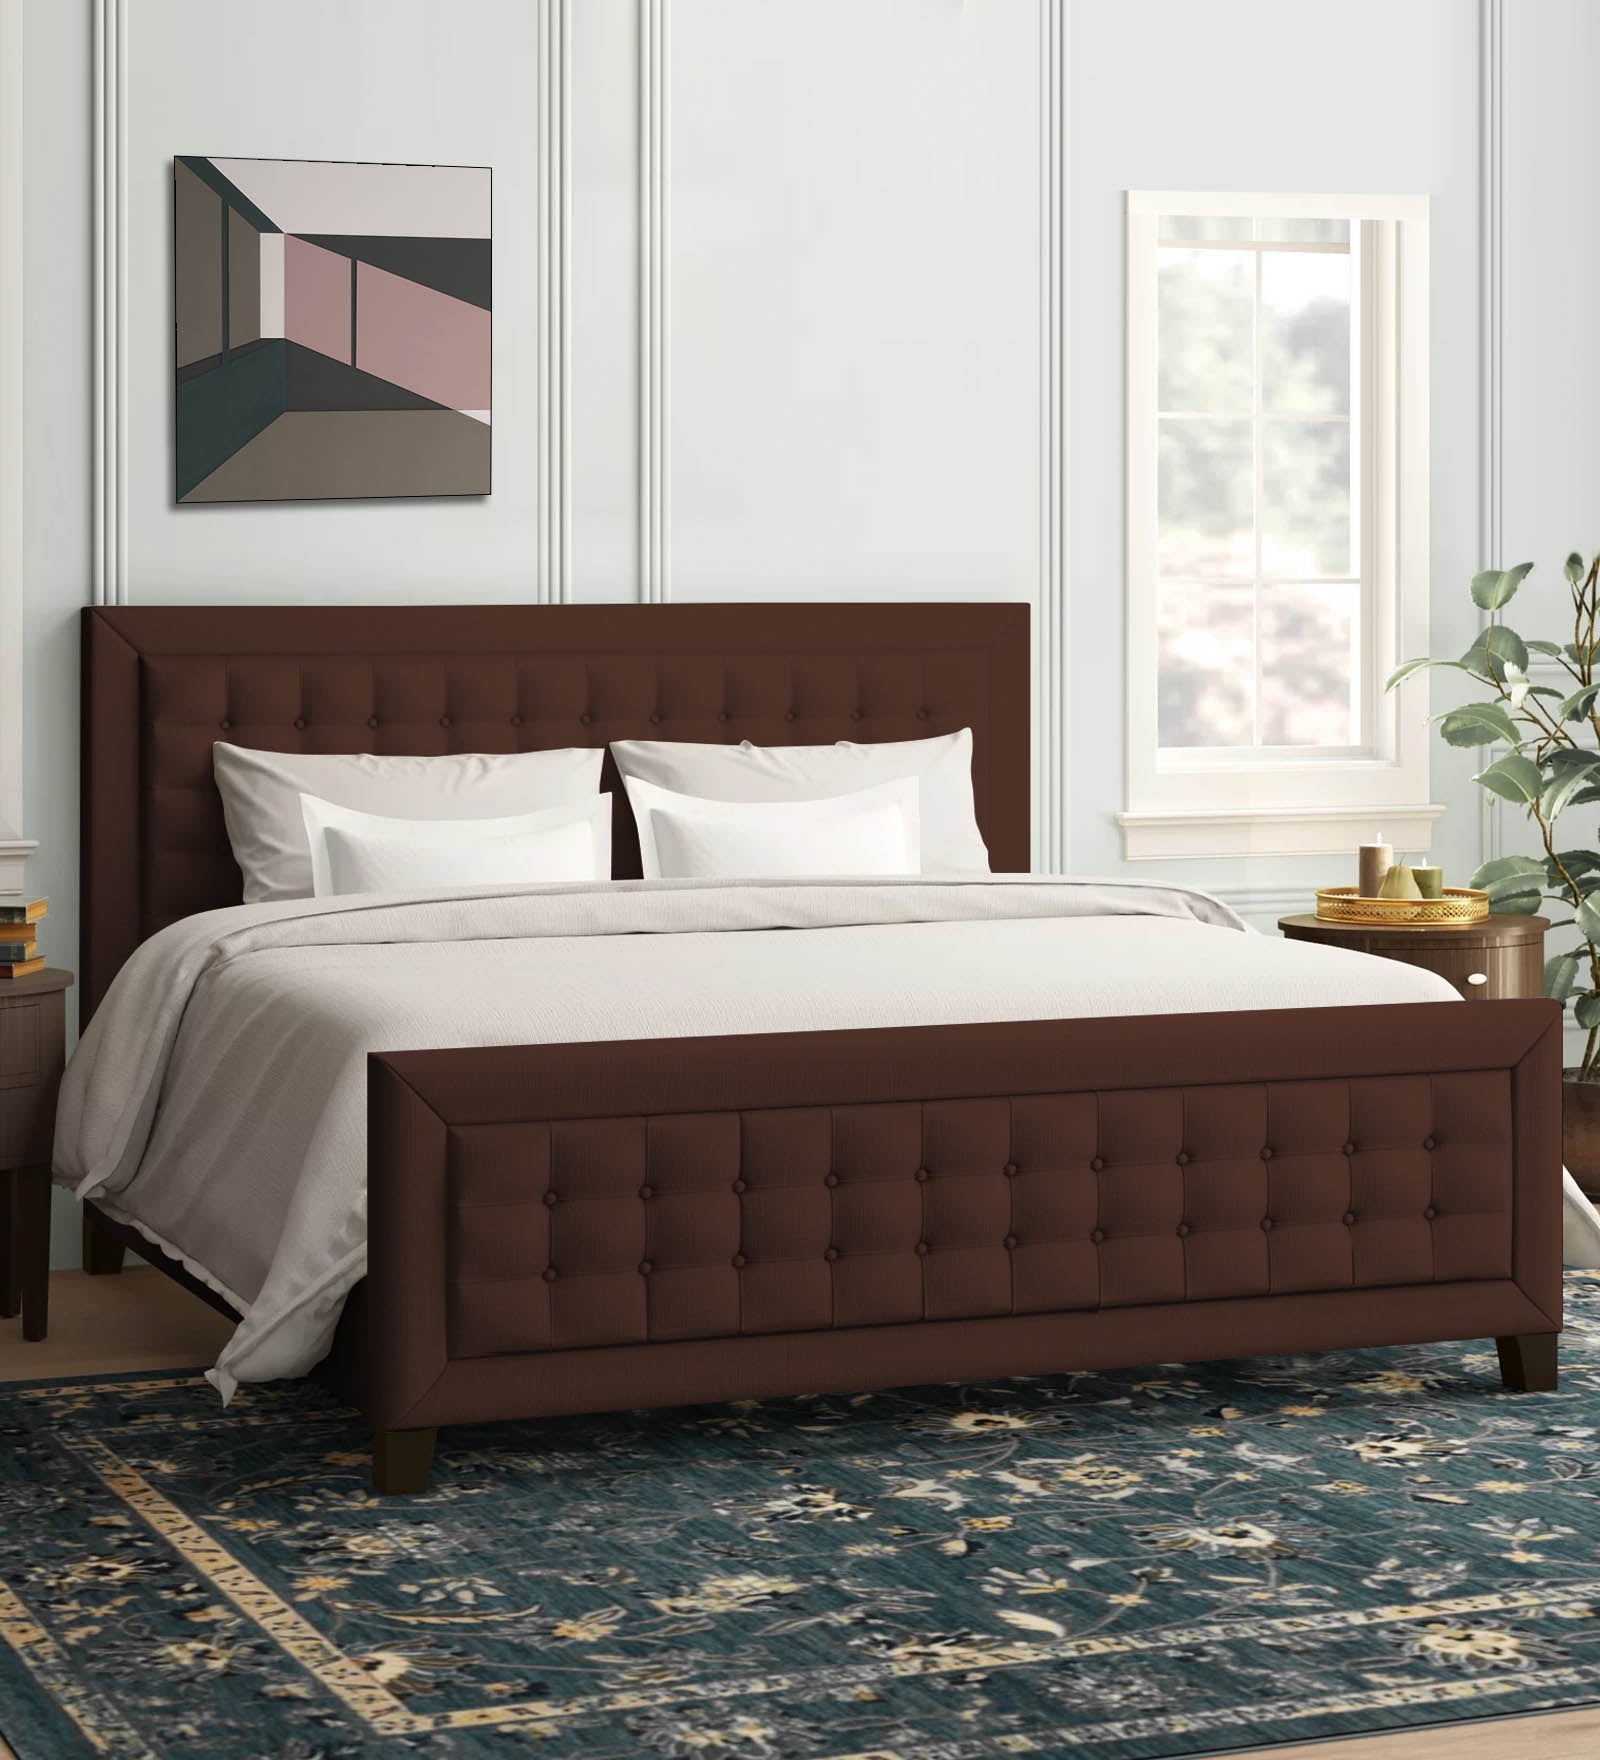 Kaster Fabric King Size Bed In Coffee Brown Colour